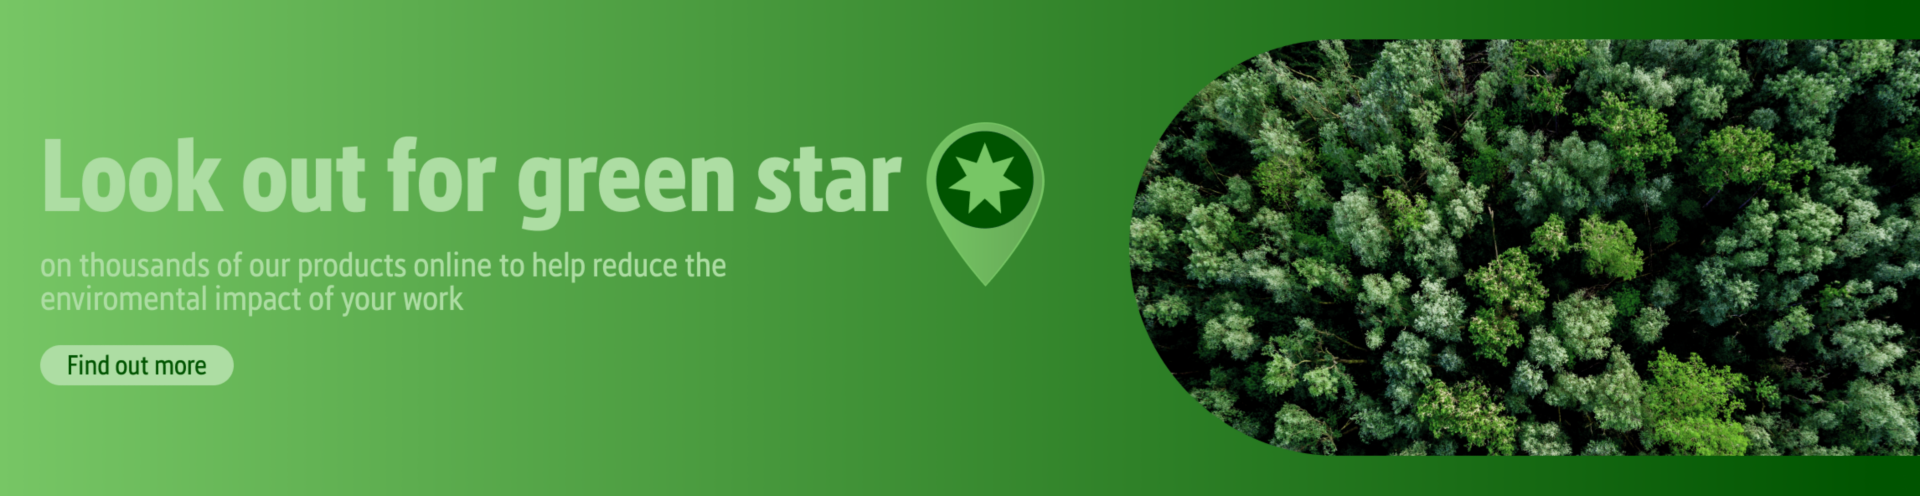 Look out for the green star